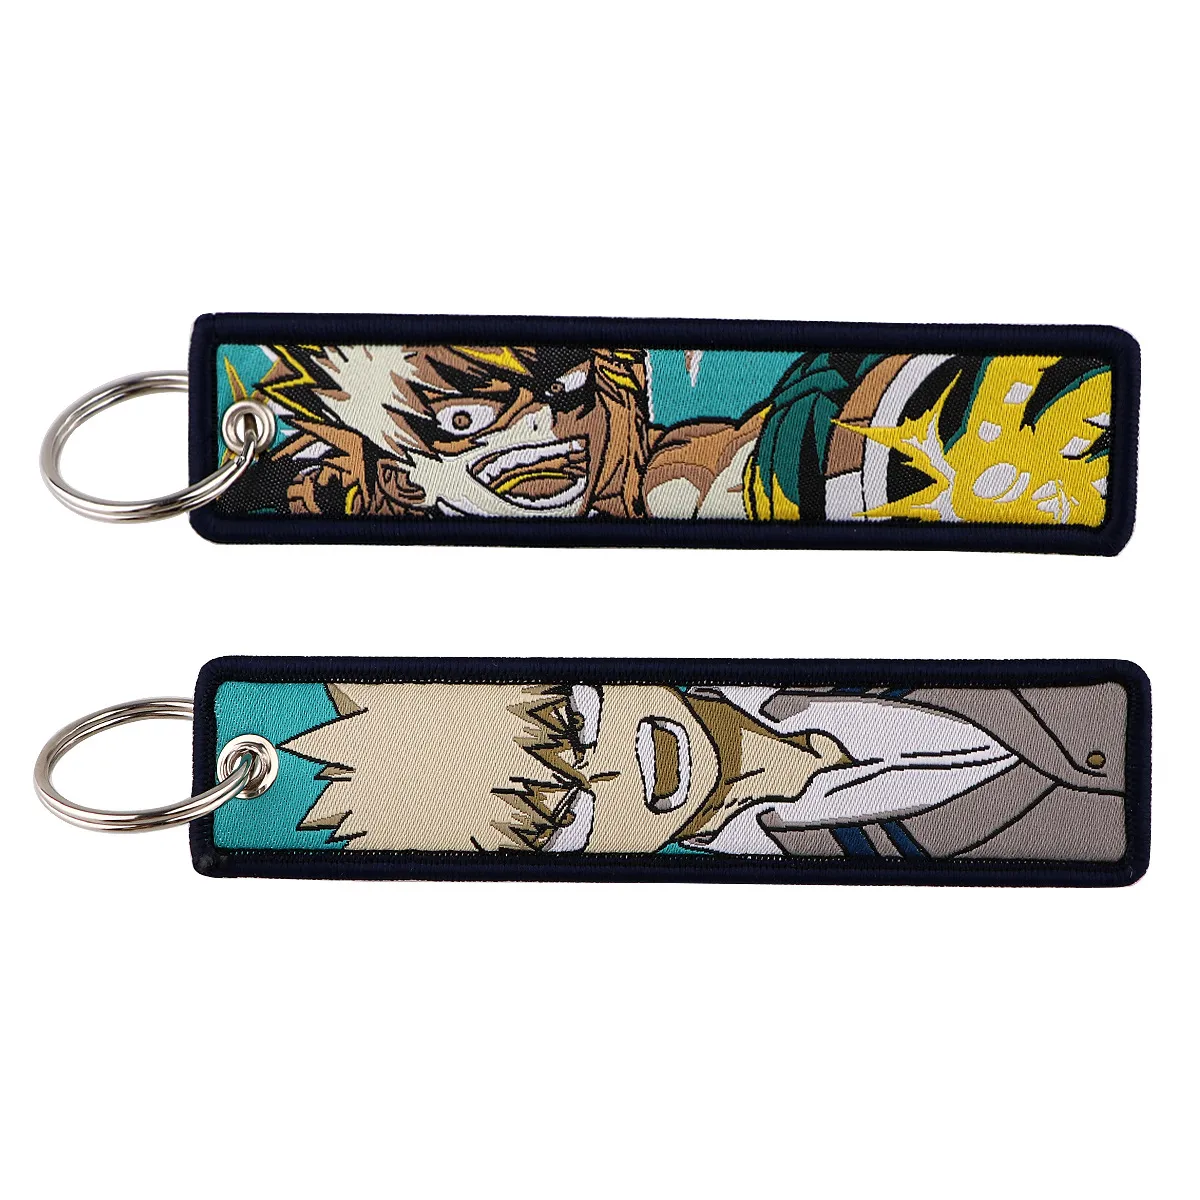 Keychains & Lanyards Various Types Of Cartoon Cool Key Tag Embroidery Fobs For Motorcycles Cars Bag Backpack Keychain Fashion Ring Gi Otqf2